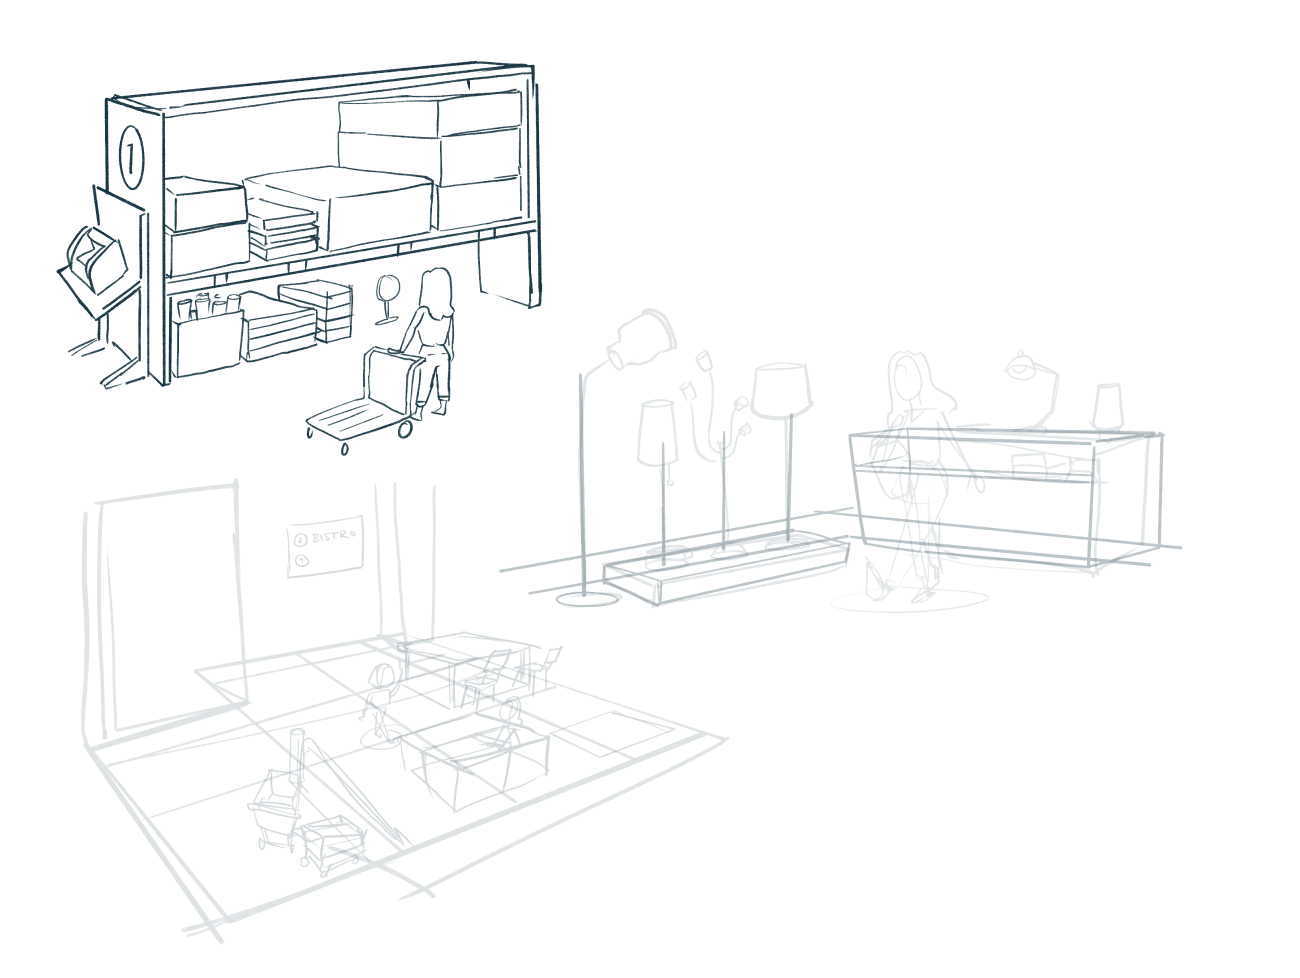 sketchy layouts of IKEA store scenes